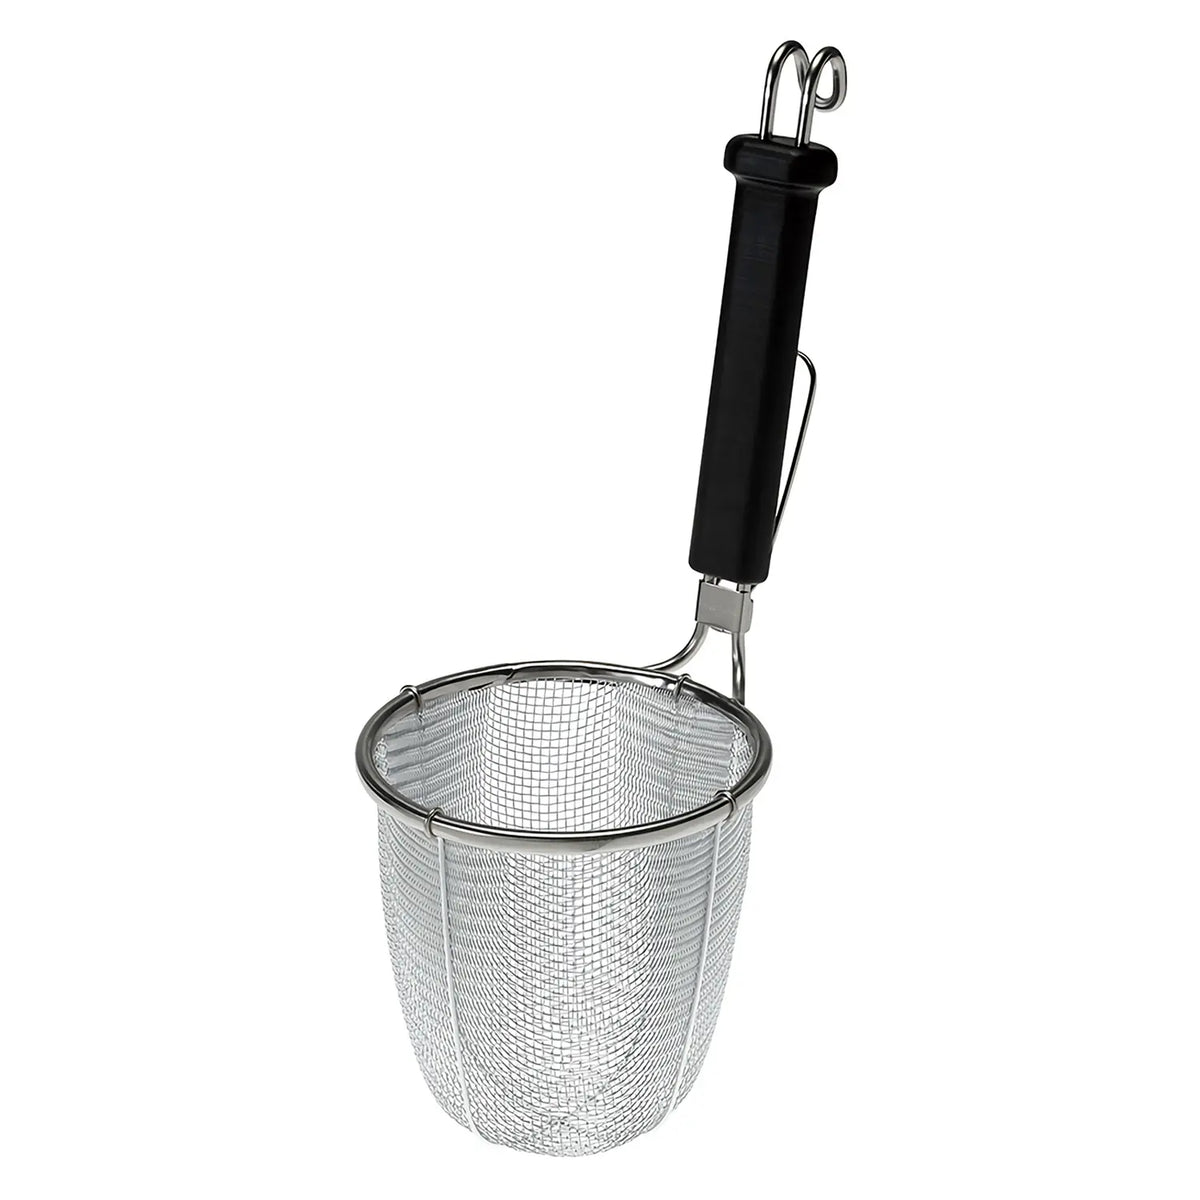 Three Snow Stainless Steel Tebo Noodle Strainer Round Base